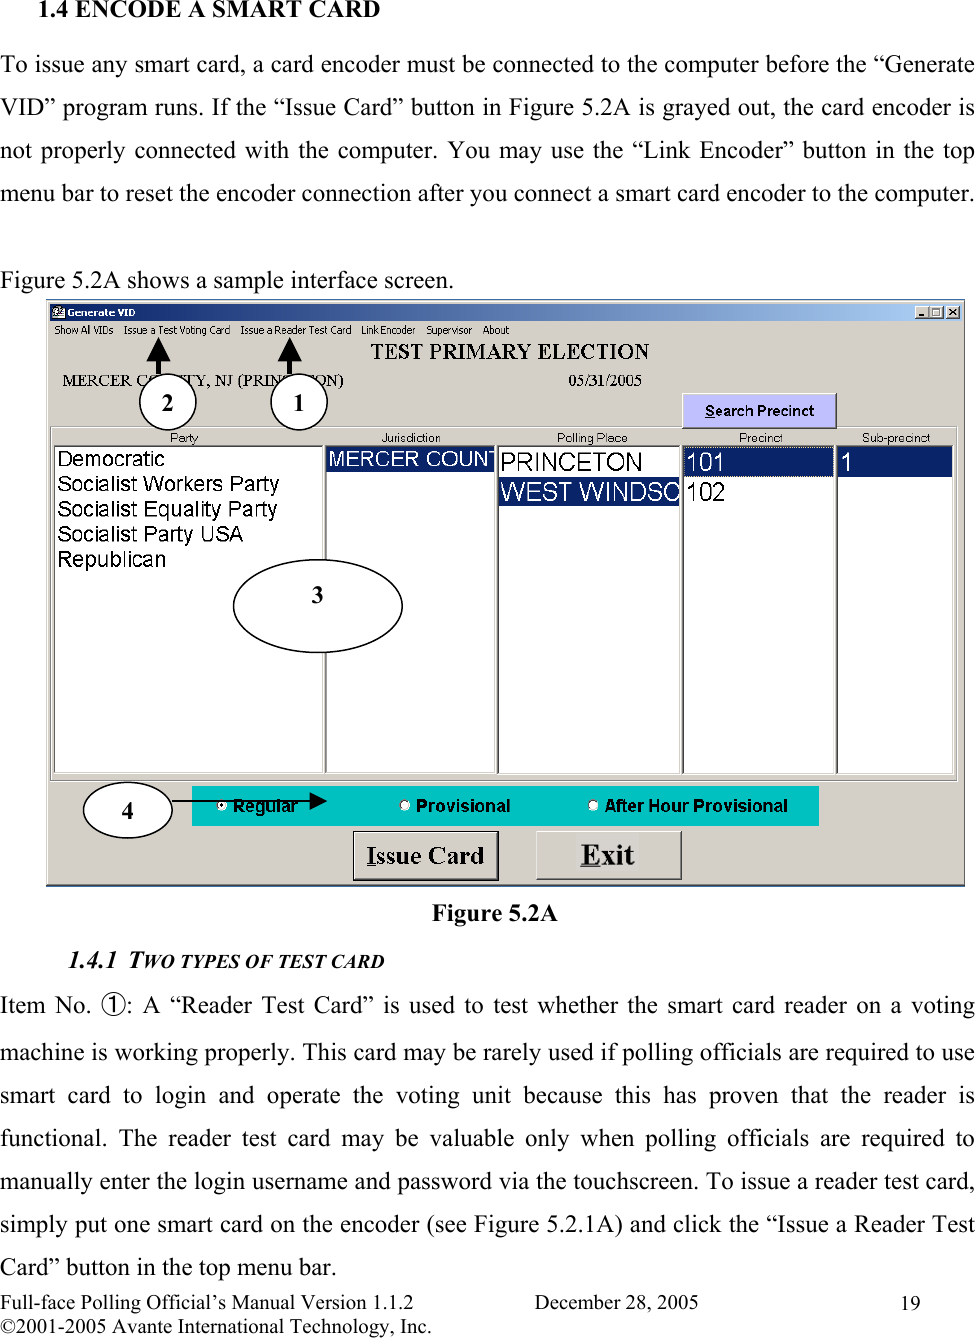    Full-face Polling Official’s Manual Version 1.1.2                       December 28, 2005 ©2001-2005 Avante International Technology, Inc.   19 1.4 ENCODE A SMART CARD To issue any smart card, a card encoder must be connected to the computer before the “Generate VID” program runs. If the “Issue Card” button in Figure 5.2A is grayed out, the card encoder is not properly connected with the computer. You may use the “Link Encoder” button in the top menu bar to reset the encoder connection after you connect a smart card encoder to the computer.  Figure 5.2A shows a sample interface screen.                1.4.1 TWO TYPES OF TEST CARD Item No. ①: A “Reader Test Card” is used to test whether the smart card reader on a voting machine is working properly. This card may be rarely used if polling officials are required to use smart card to login and operate the voting unit because this has proven that the reader is functional. The reader test card may be valuable only when polling officials are required to manually enter the login username and password via the touchscreen. To issue a reader test card, simply put one smart card on the encoder (see Figure 5.2.1A) and click the “Issue a Reader Test Card” button in the top menu bar. Figure 5.2A 1 2 3 4 